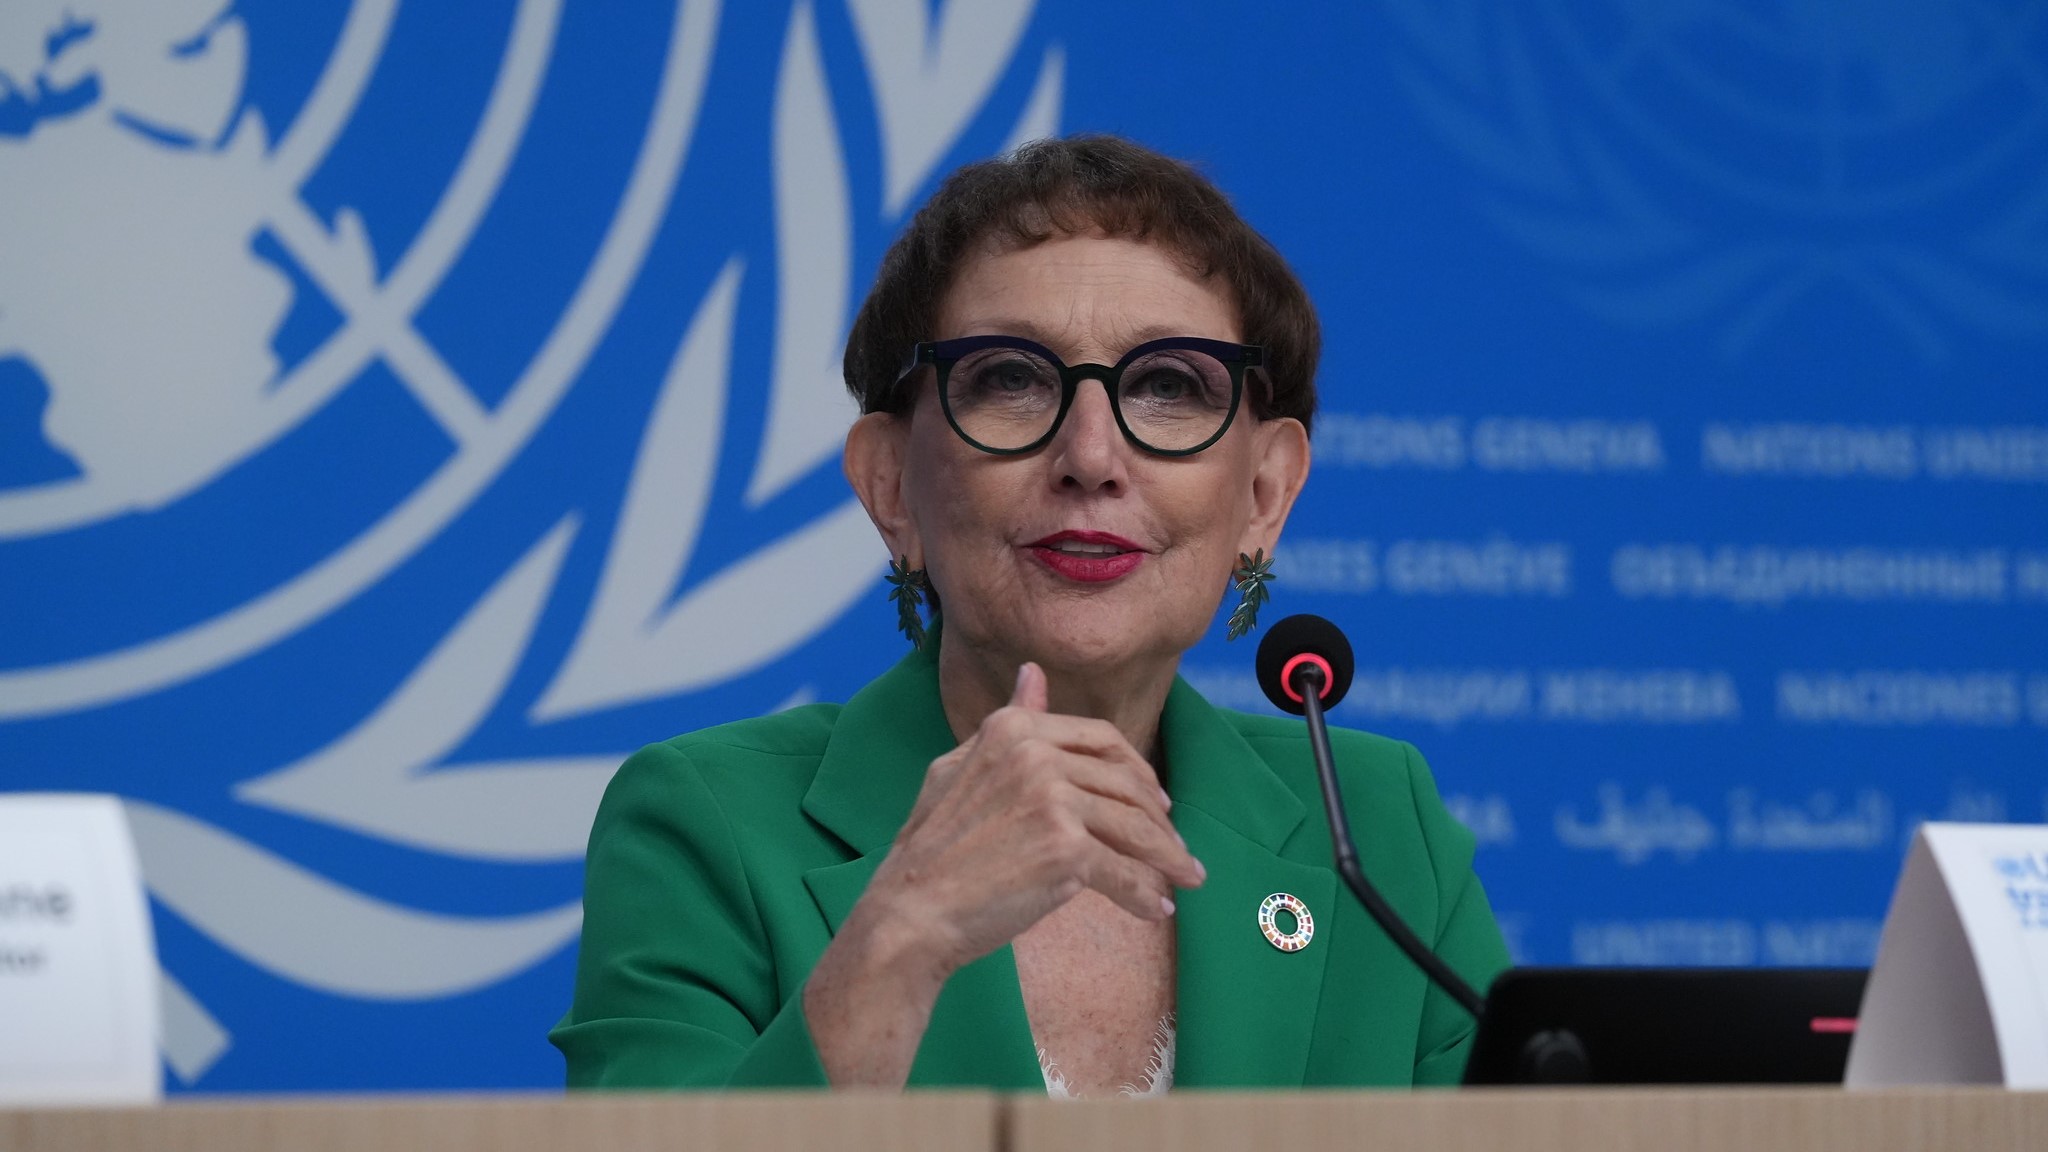 UN Trade and Development chief: Digital economy key to growth but environmental impact must be addressed